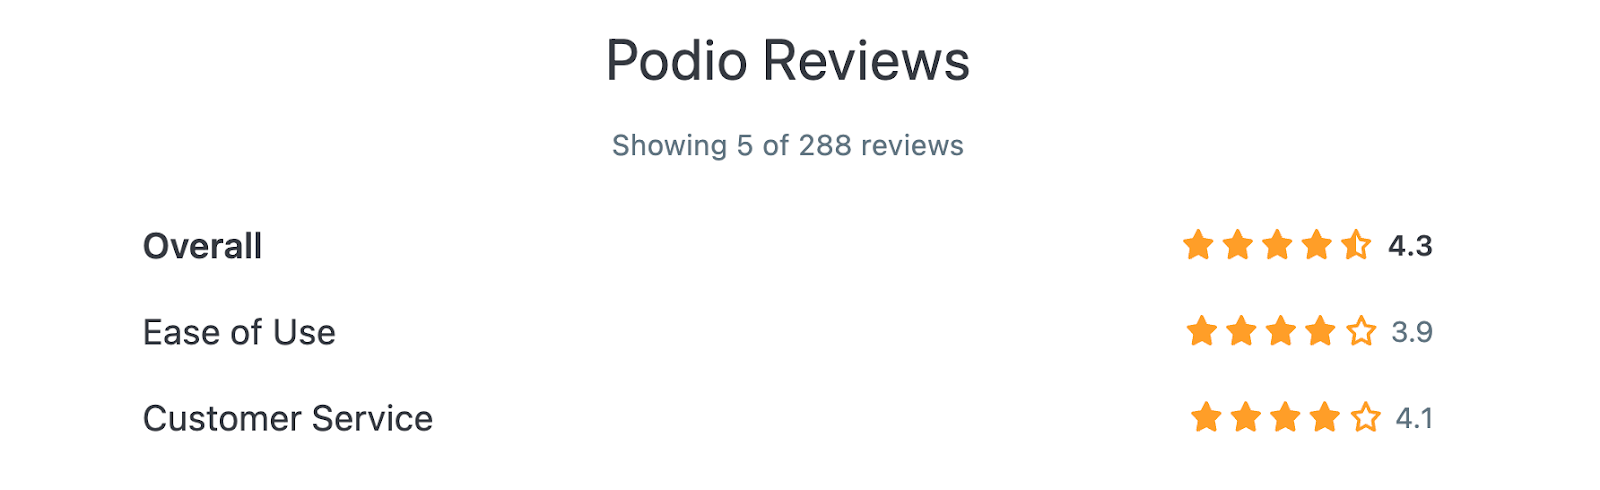 Podio reviews on Capterra (Overall: 4.3, Ease of Use: 3.9, Customer Service: 4.1)